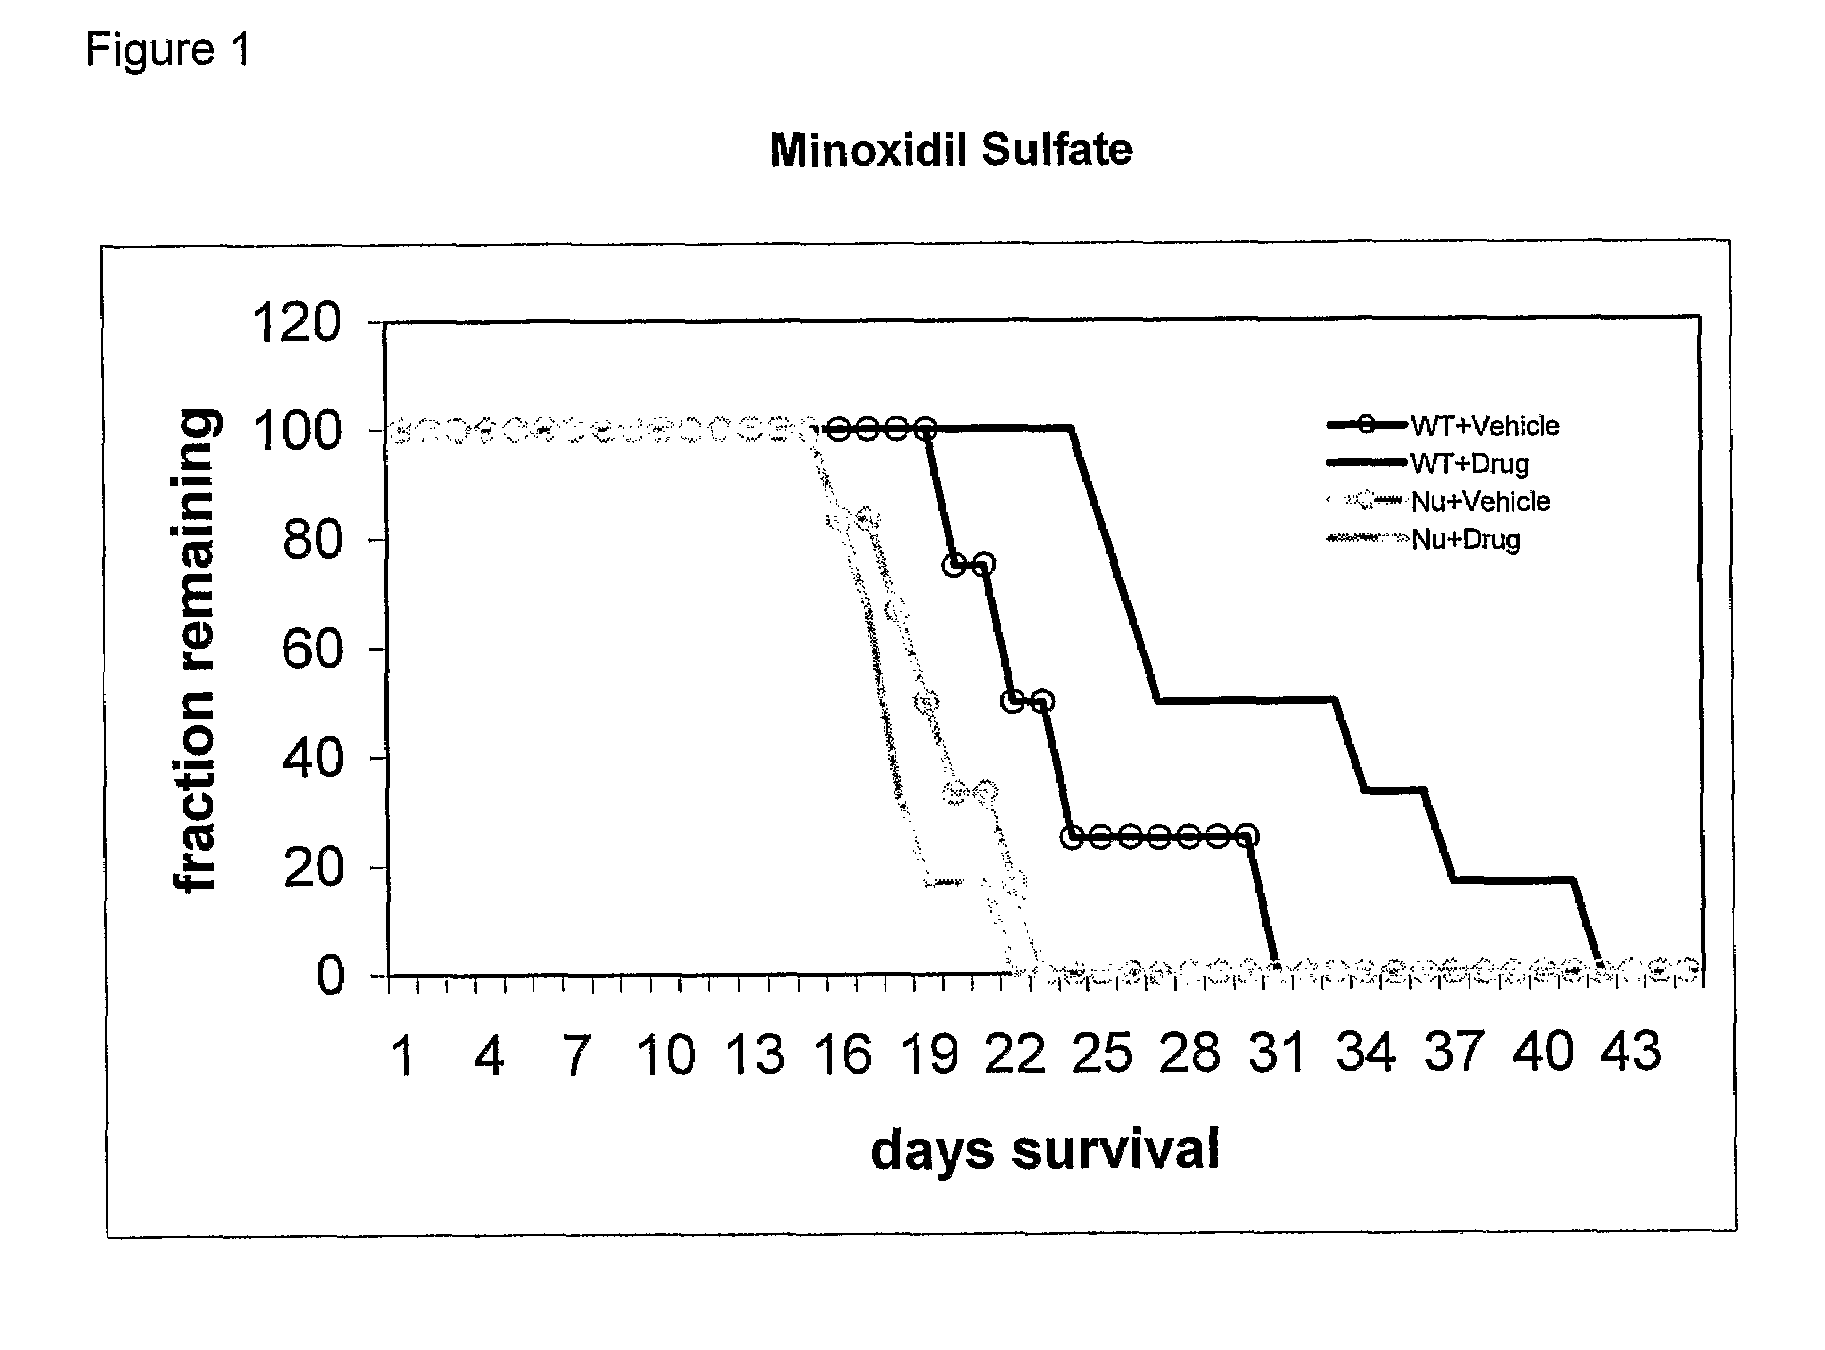 Use of minoxidil sulfate as an anti-tumor drug